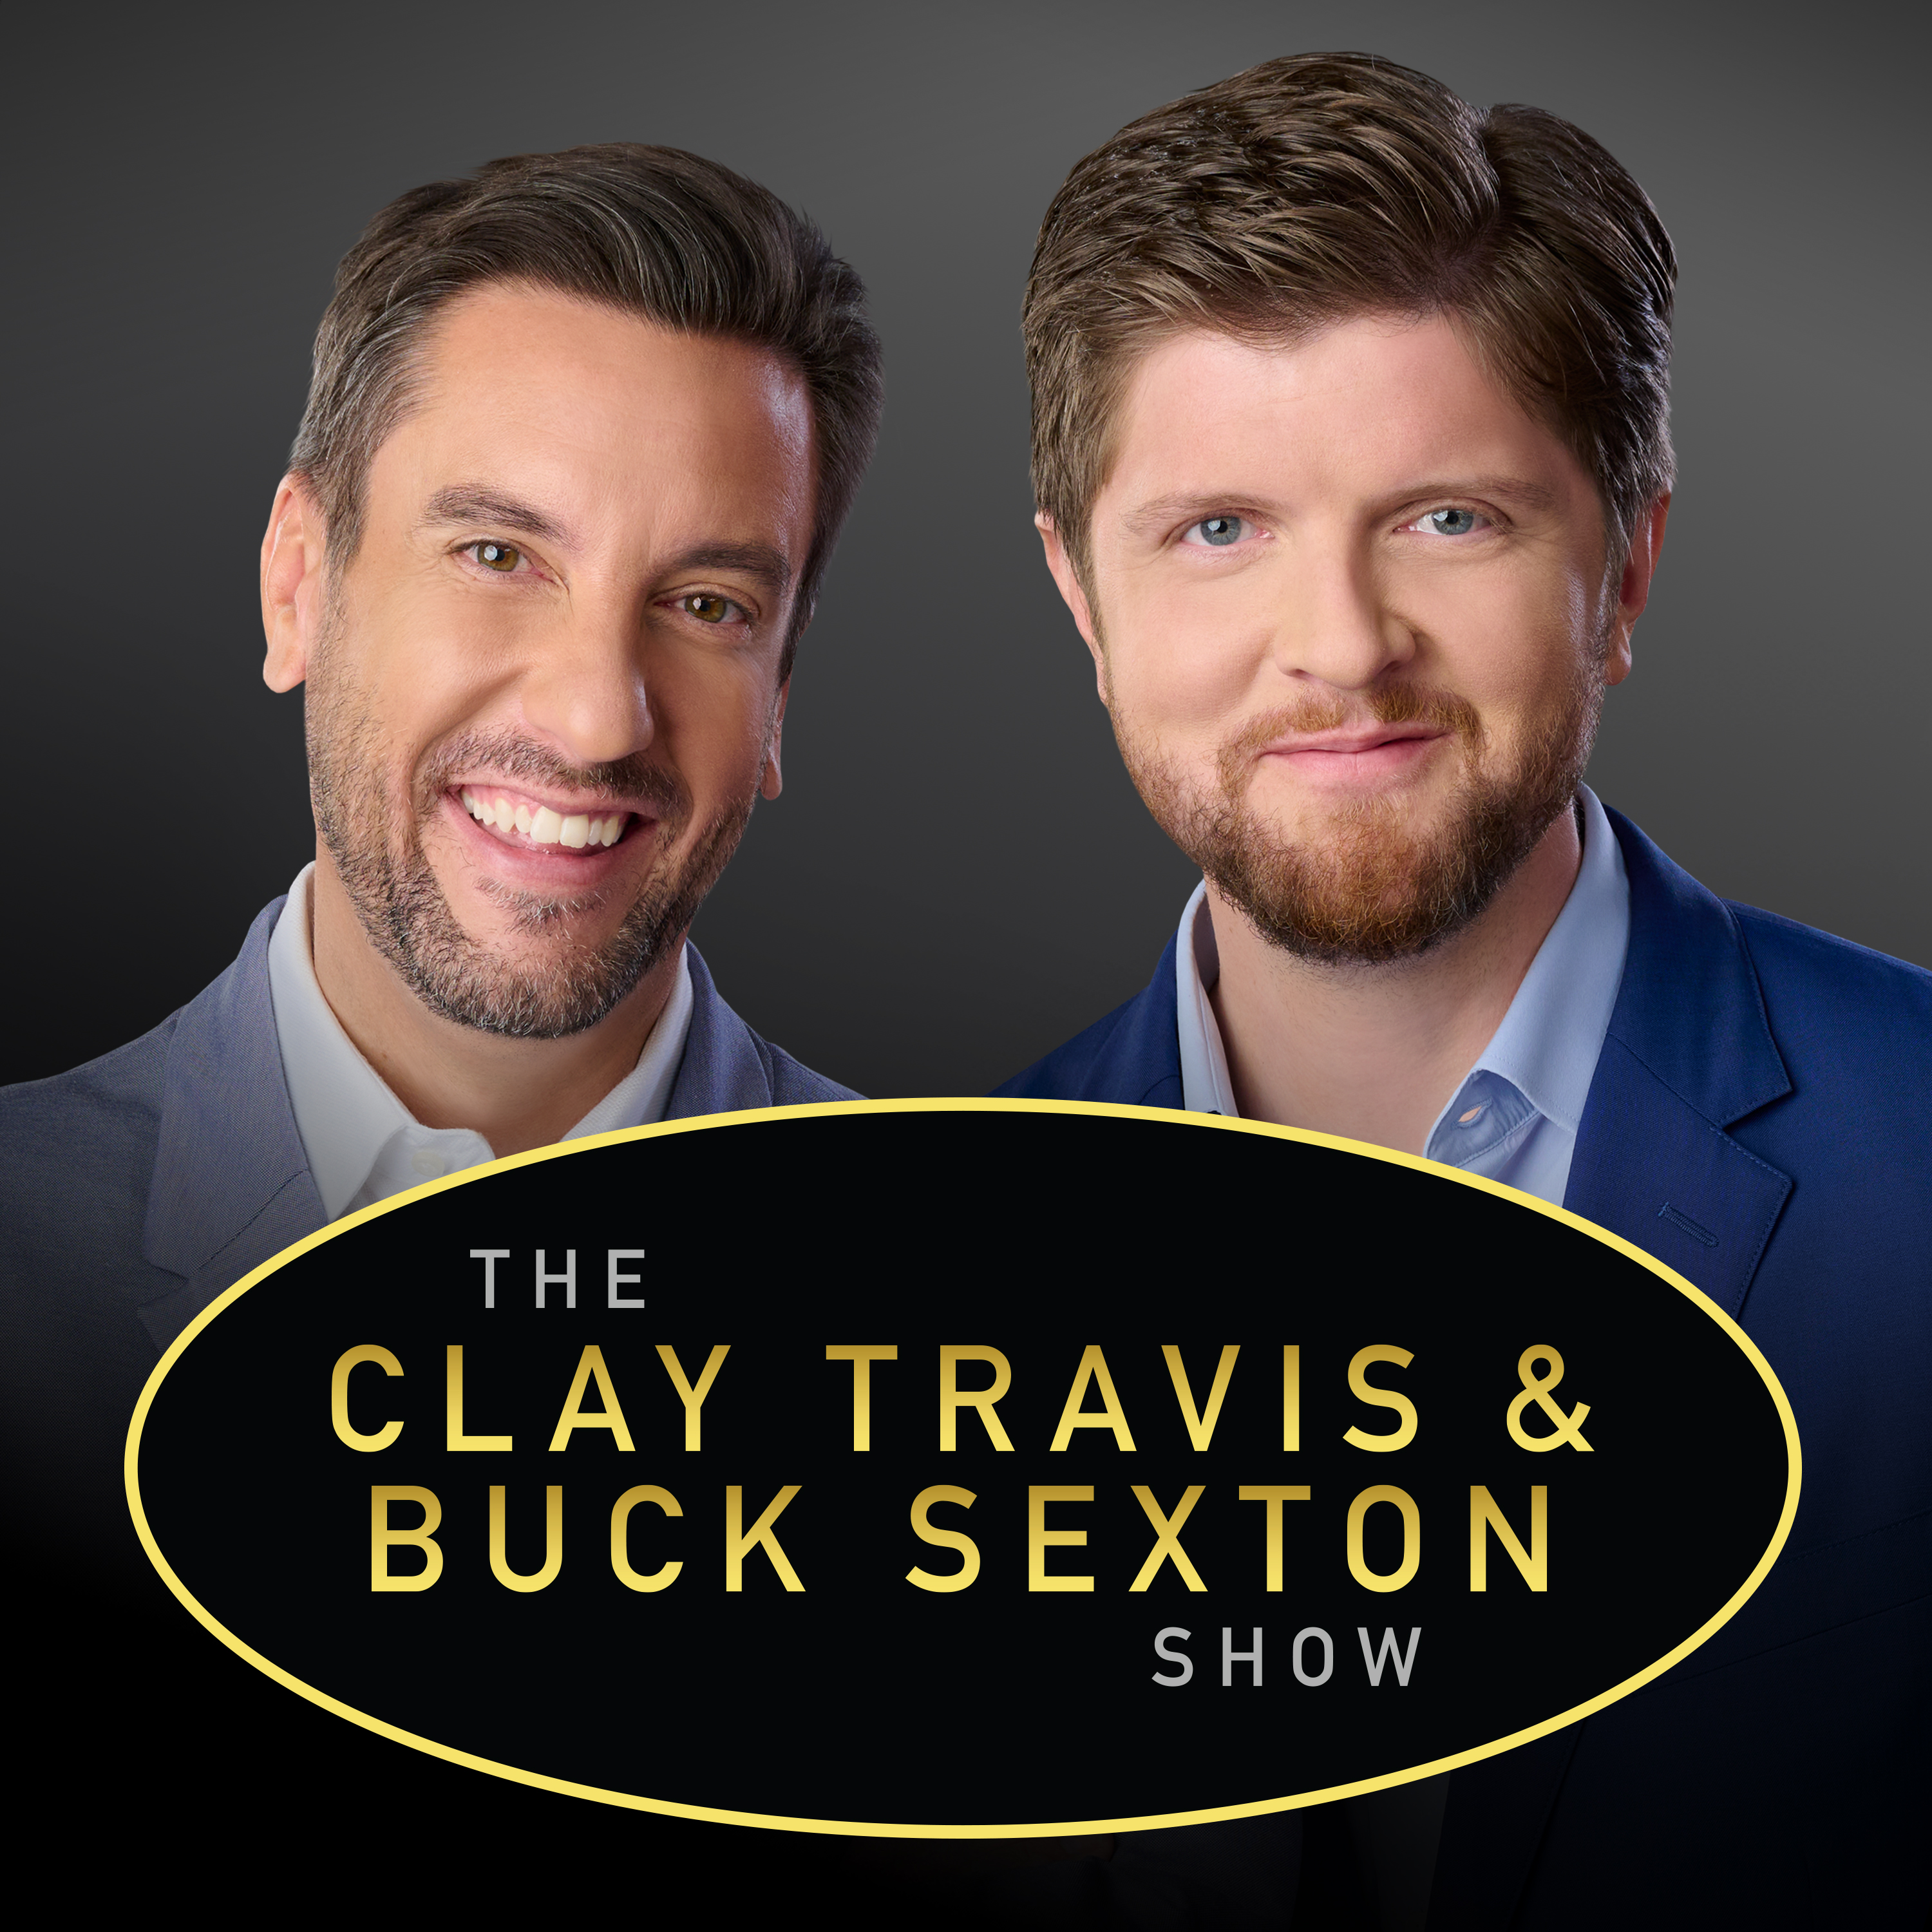 Clay Travis and Buck Sexton Show H1 – Apr 8 2022